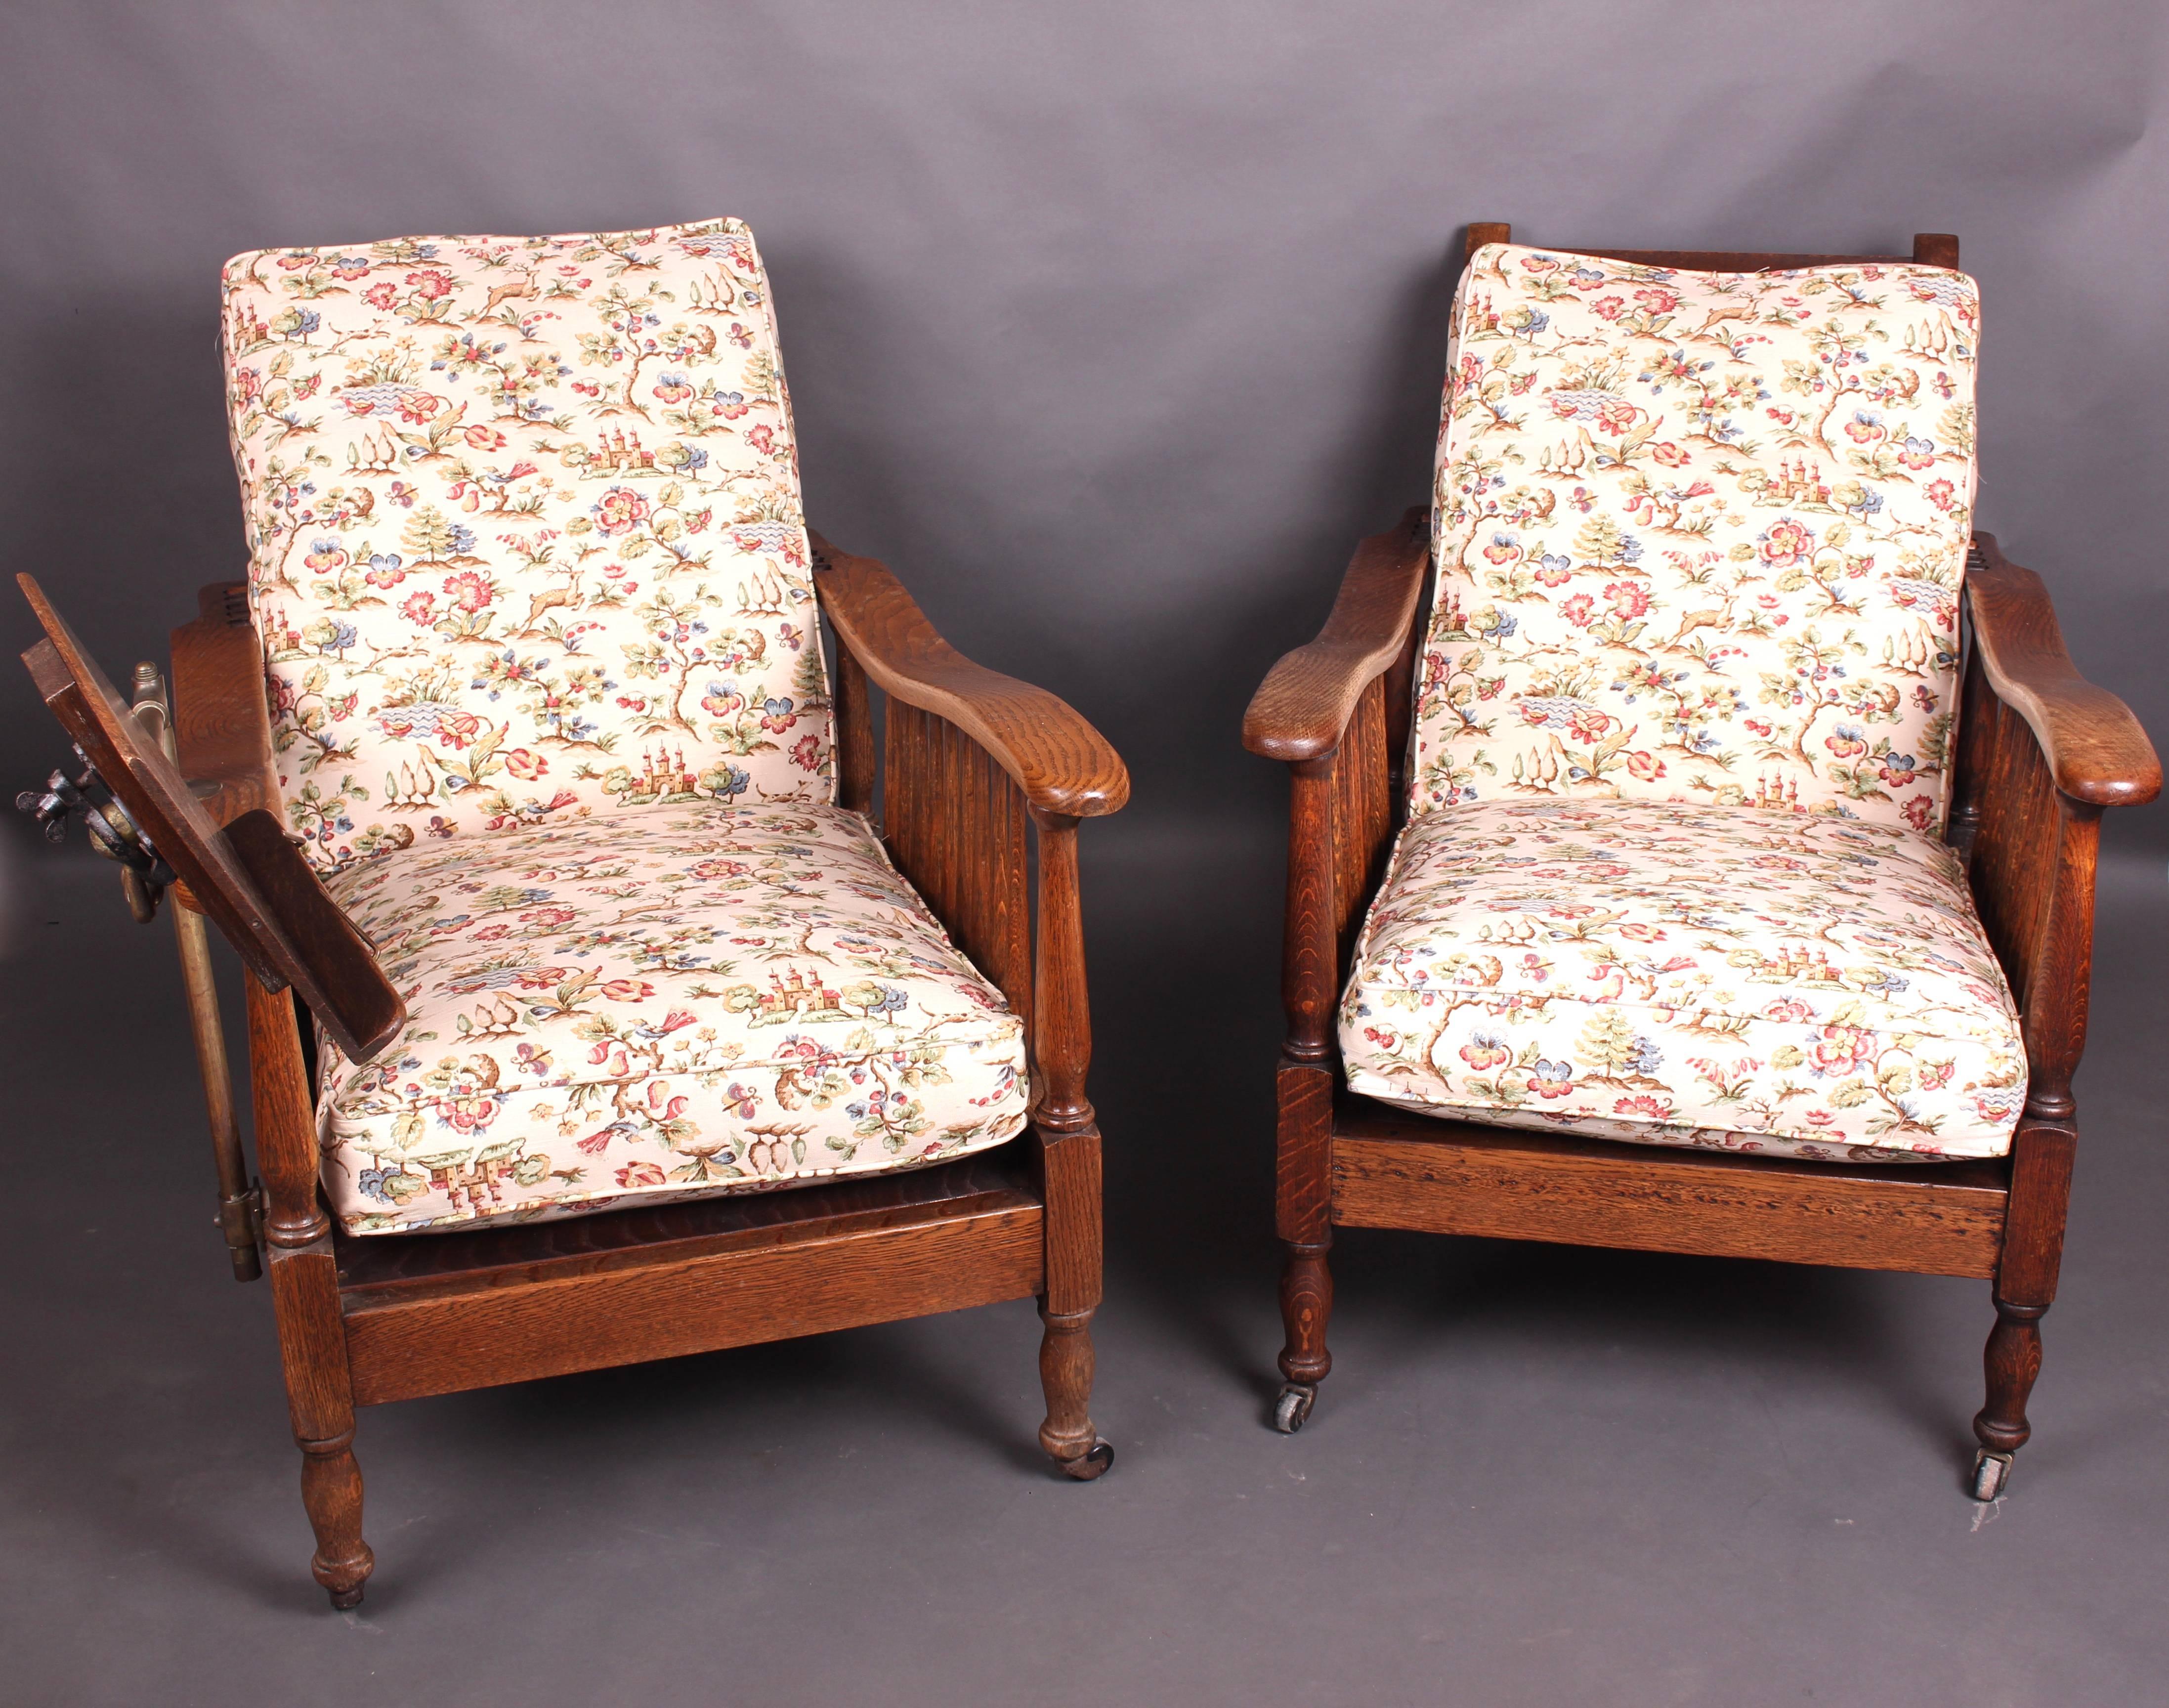 A lovely pair of Edwardian oak steamer chairs. One with a carters patent reading stand. Beautifully designed and well made. Having wonderful classic lines with a slatted back and base, the back being adjustable depending on your mood! The arms are